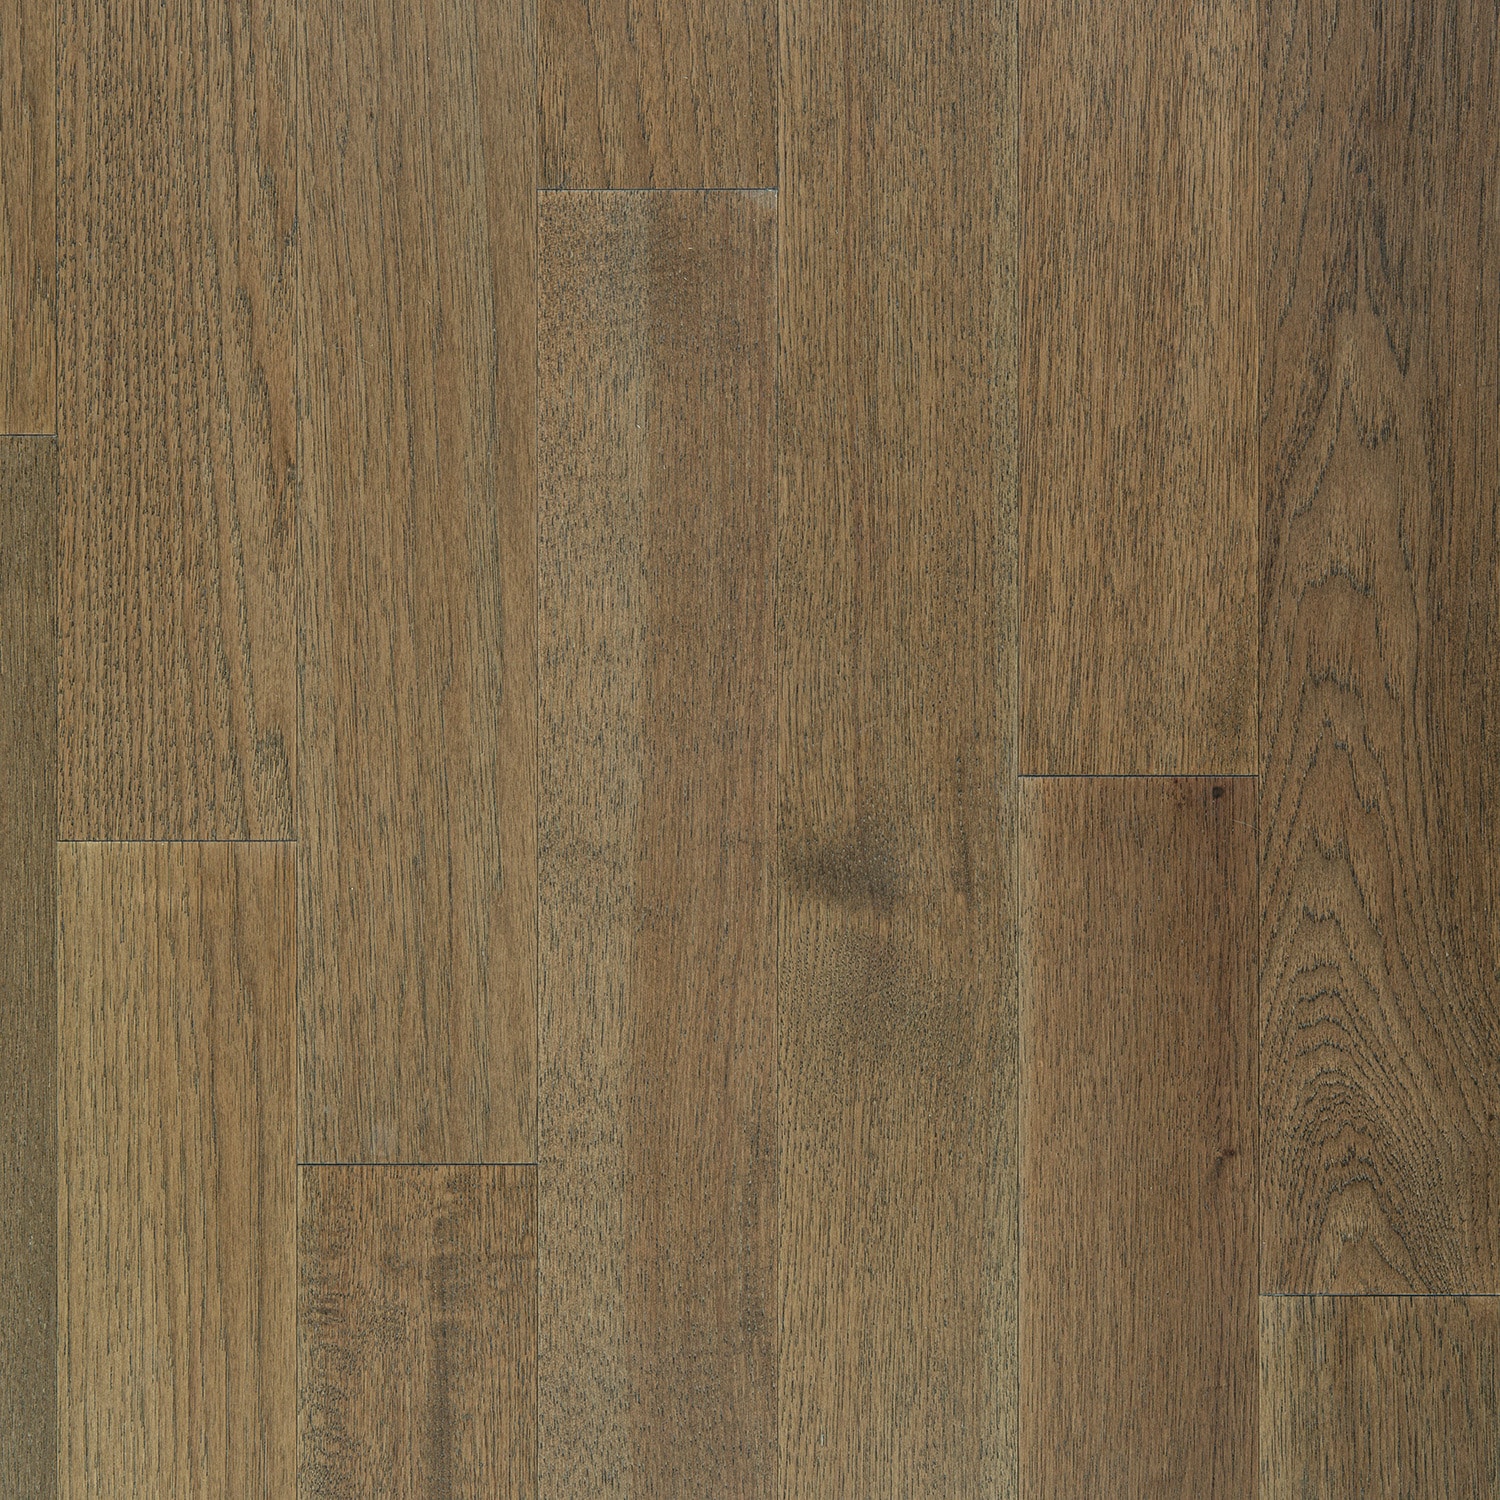 Saddle Hickory 3-1/2-in W x 3/8-in T Wirebrushed Engineered Hardwood Flooring (26.14-sq ft) in Brown | - allen + roth 19LY036